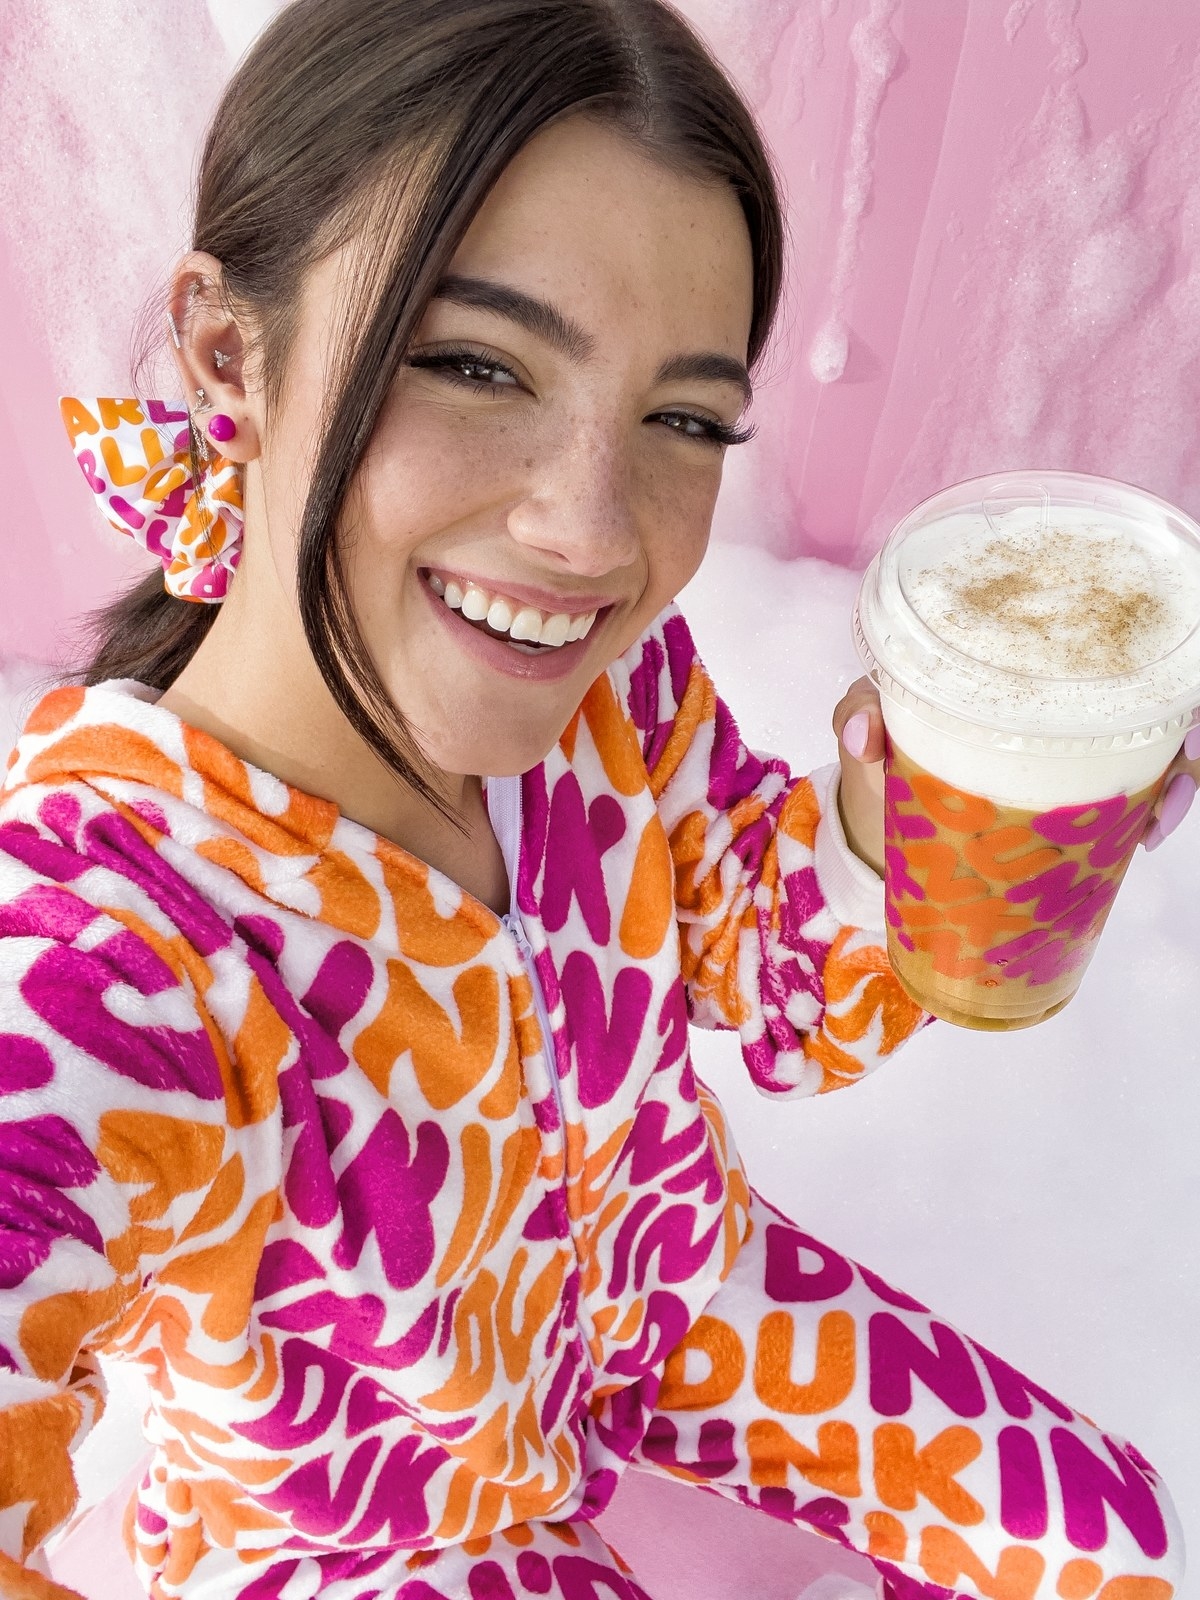 Charli D&#x27;Amelio poses for a selfie in matching Dunkin Donuts pants and jacket, while holding a Dunkin-branded iced coffee